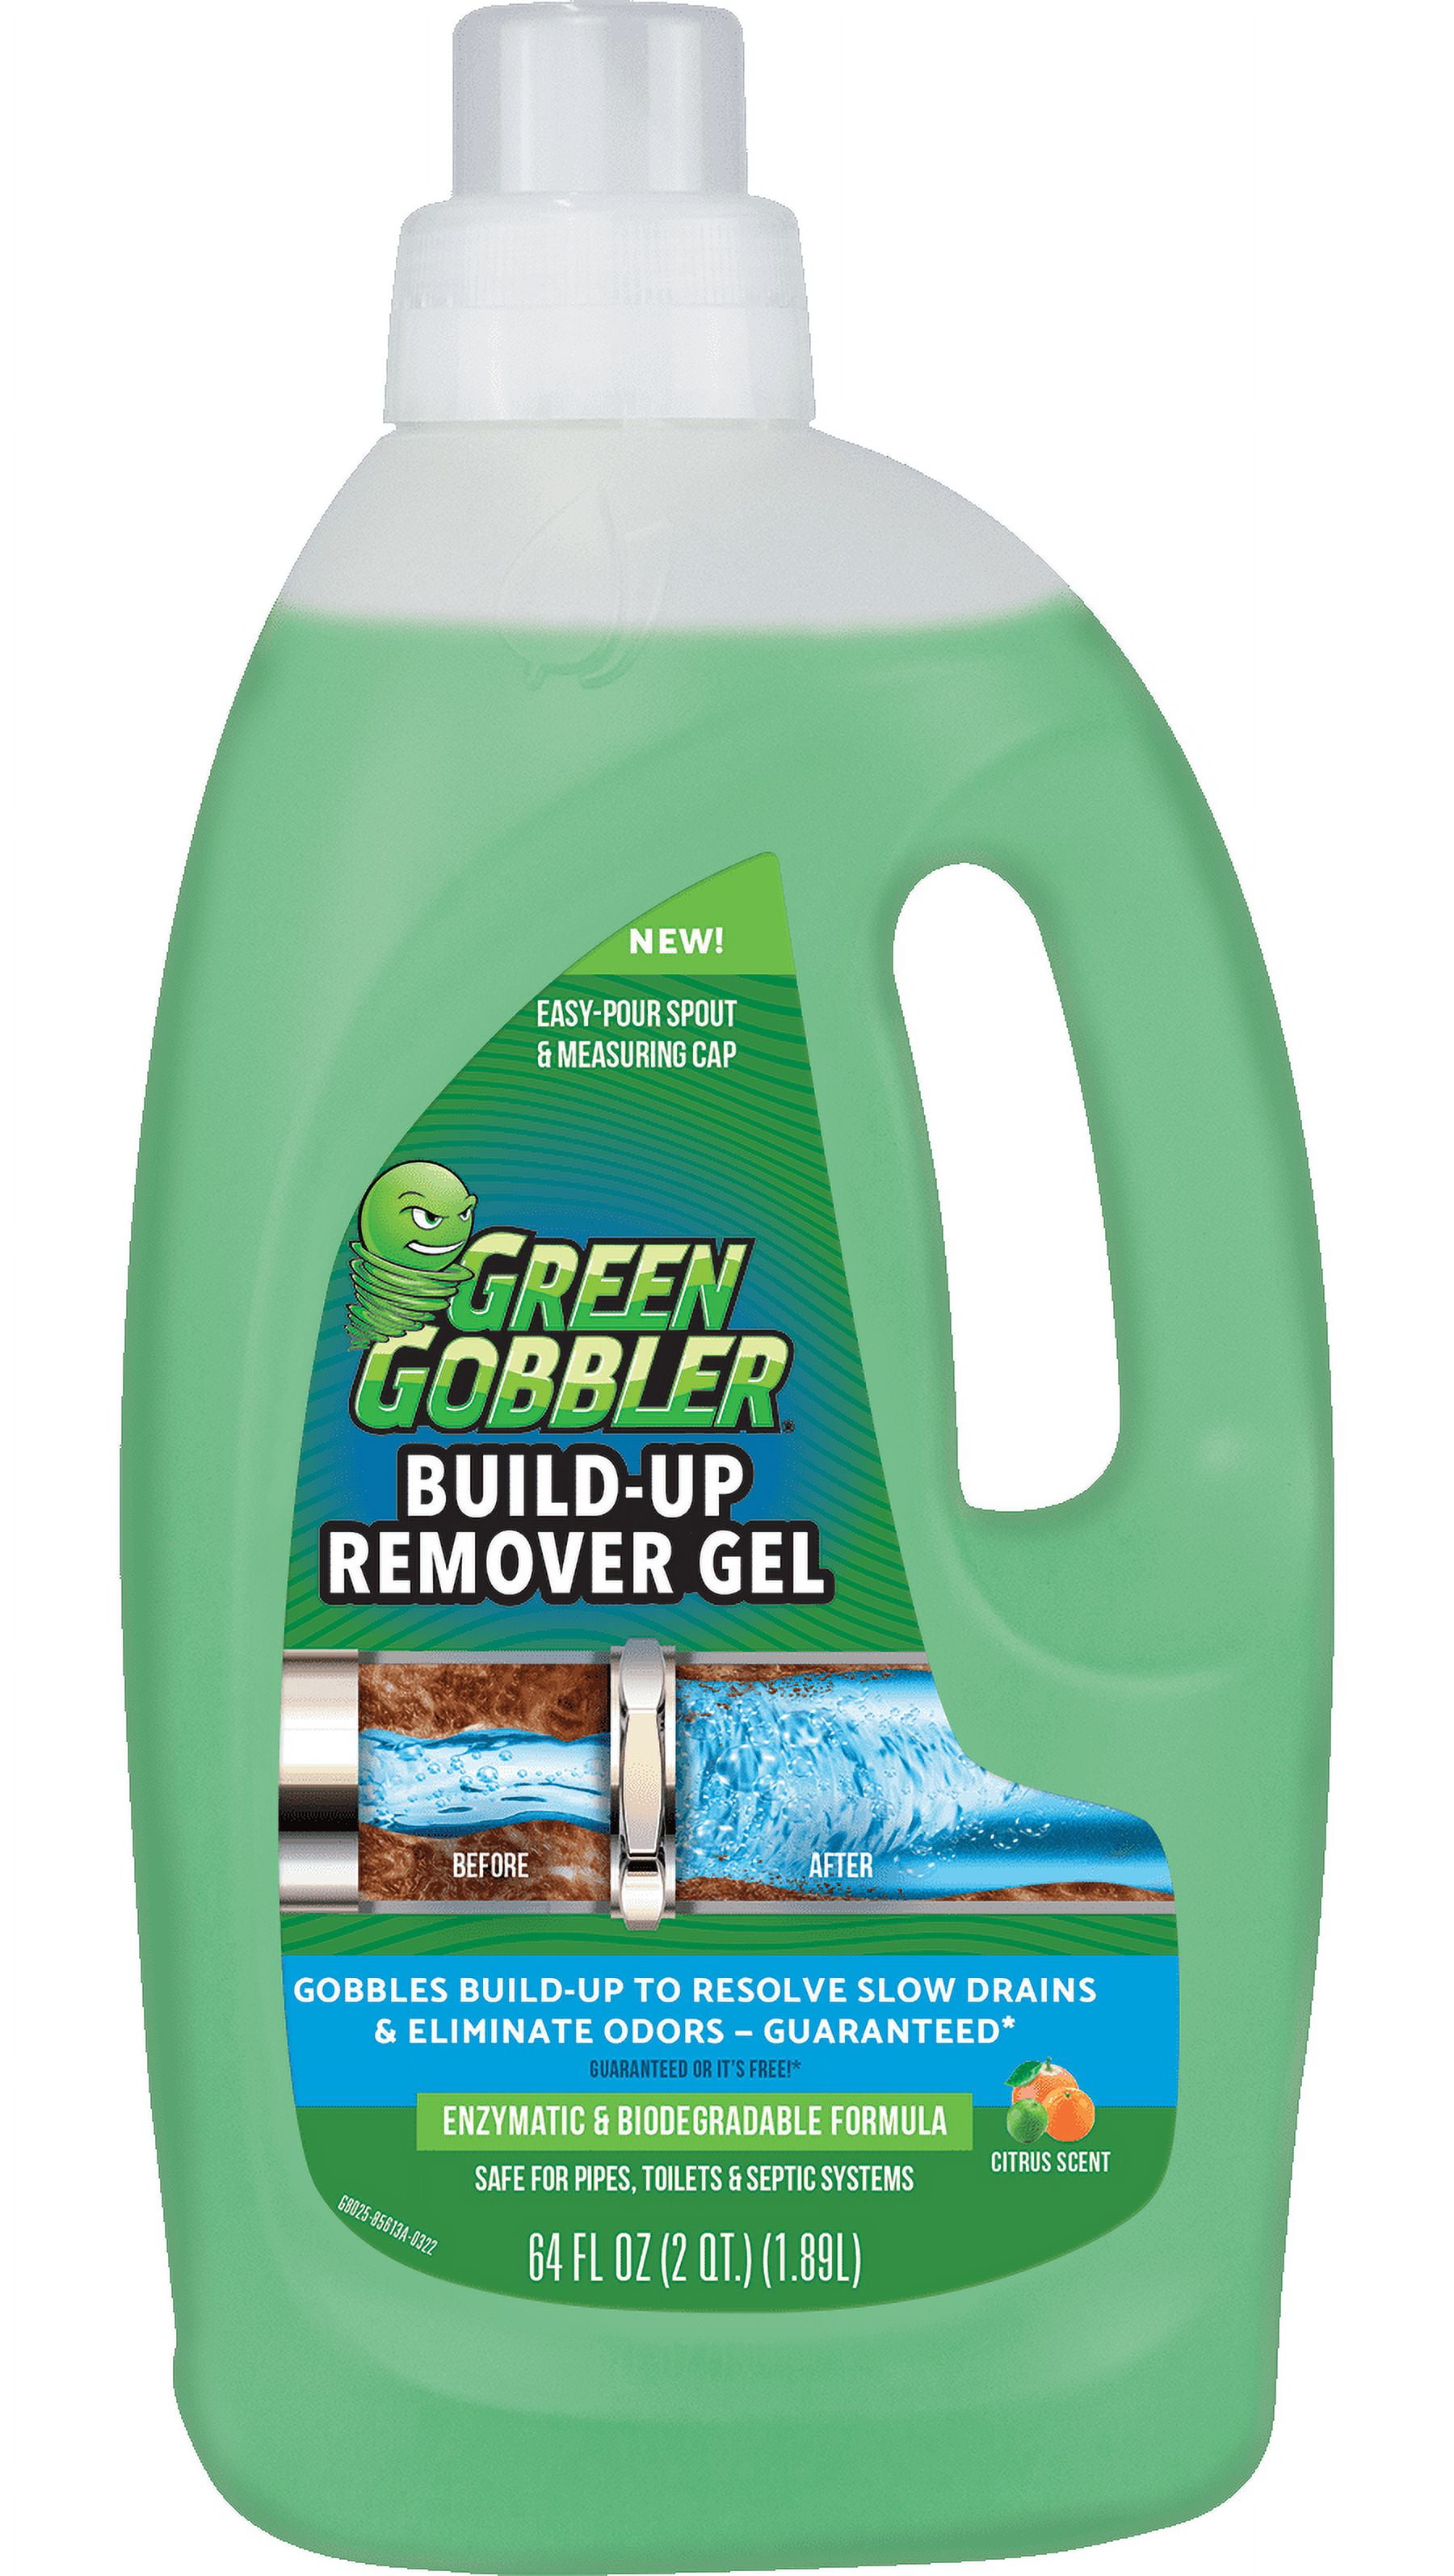 Green Gobbler Industrial Strength Gel Grease and Hair Clog Remover - 64 oz